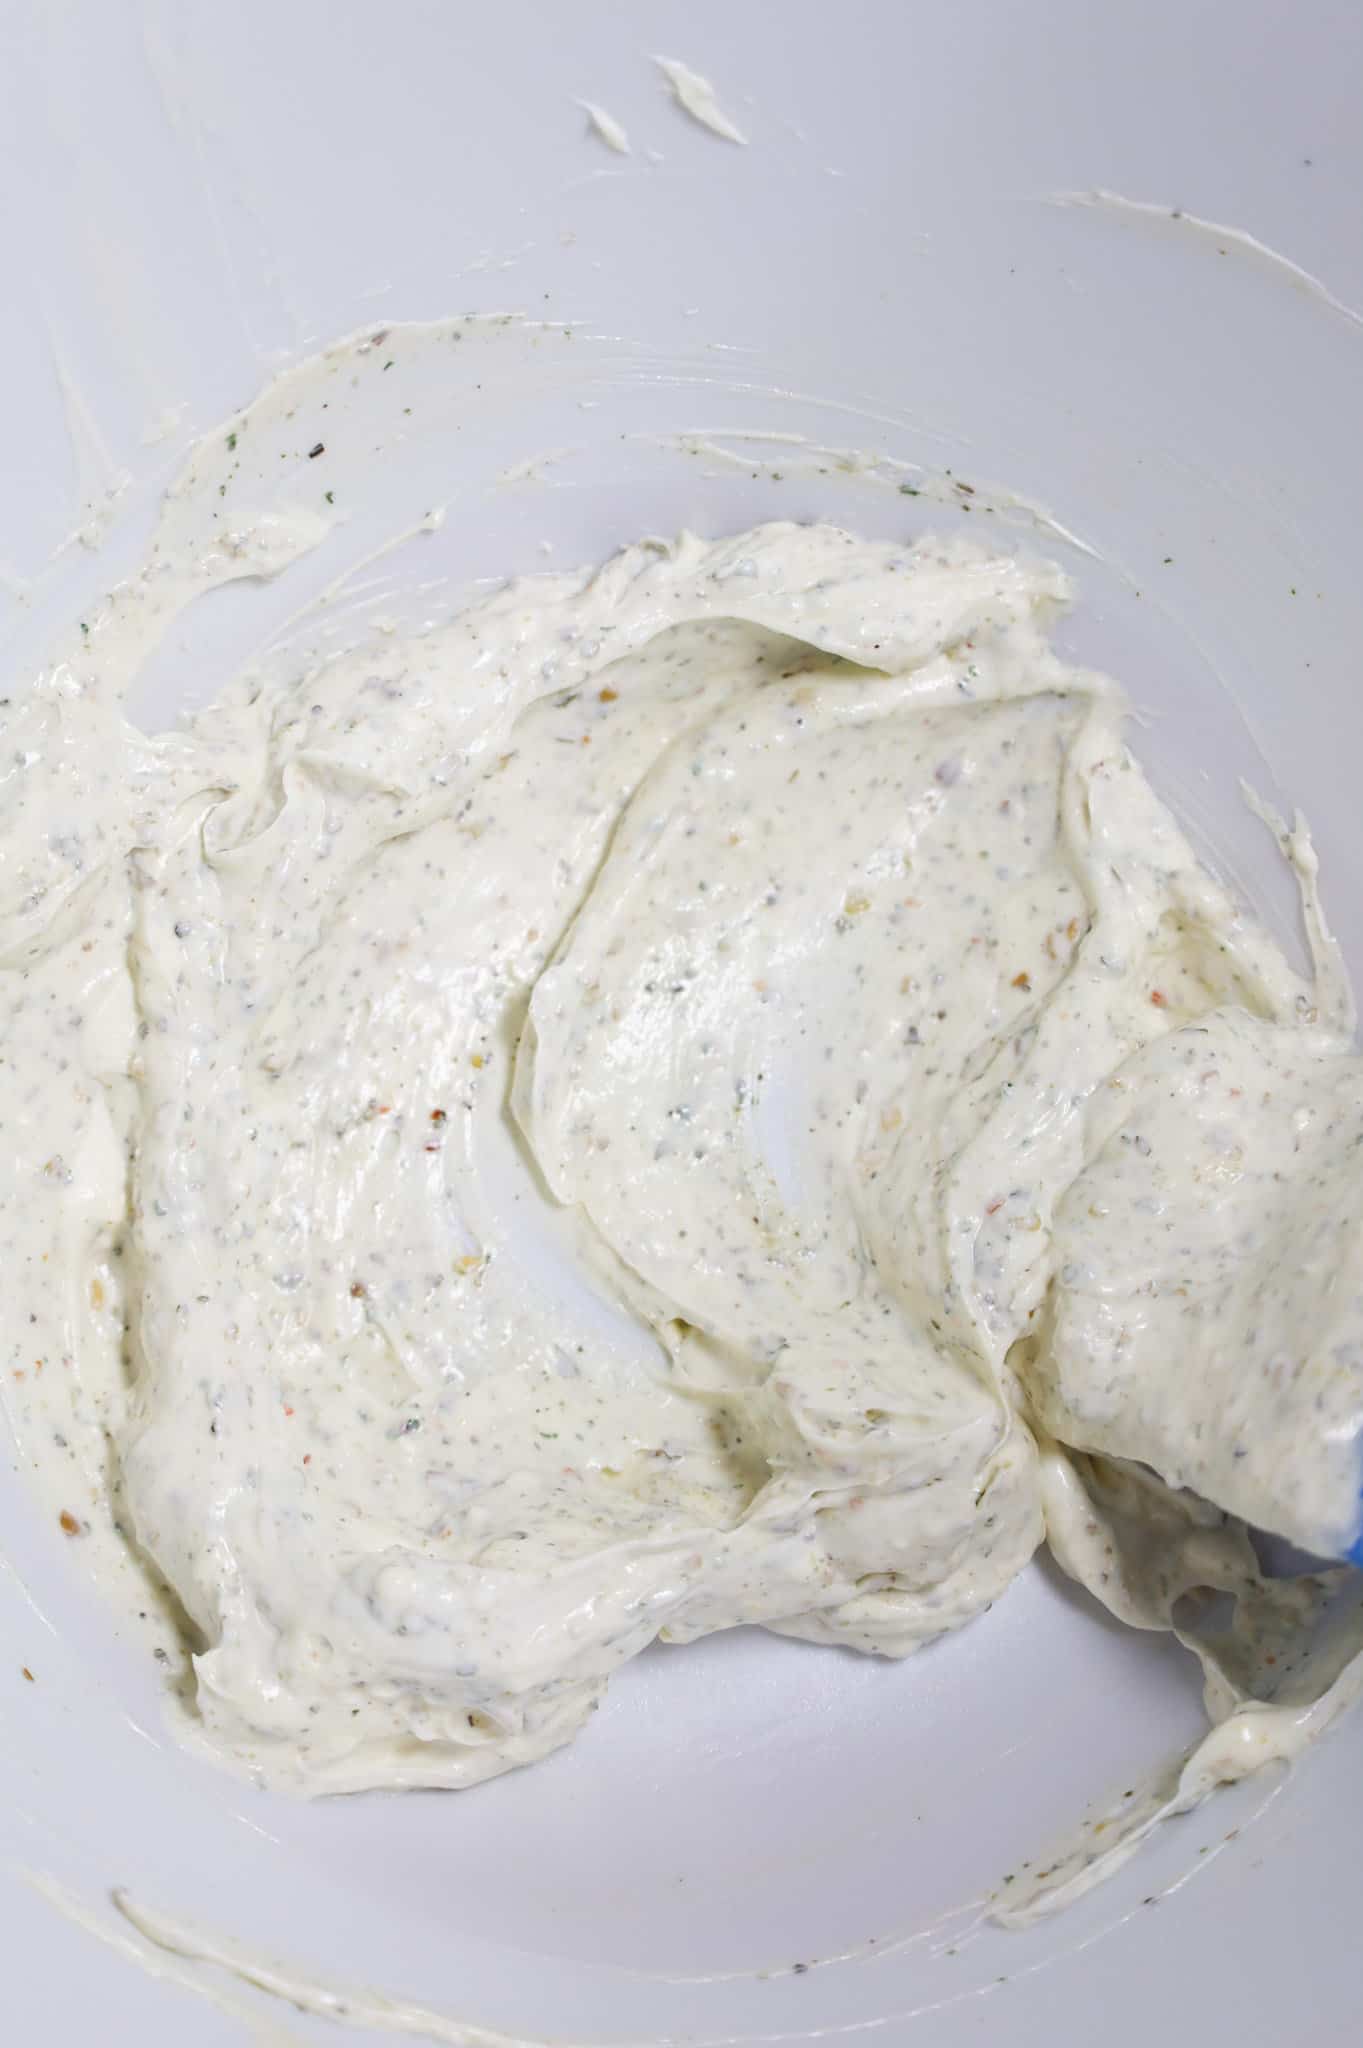 Italian seasoning stirred into sour cream and mayo mixture in a mixing bowl